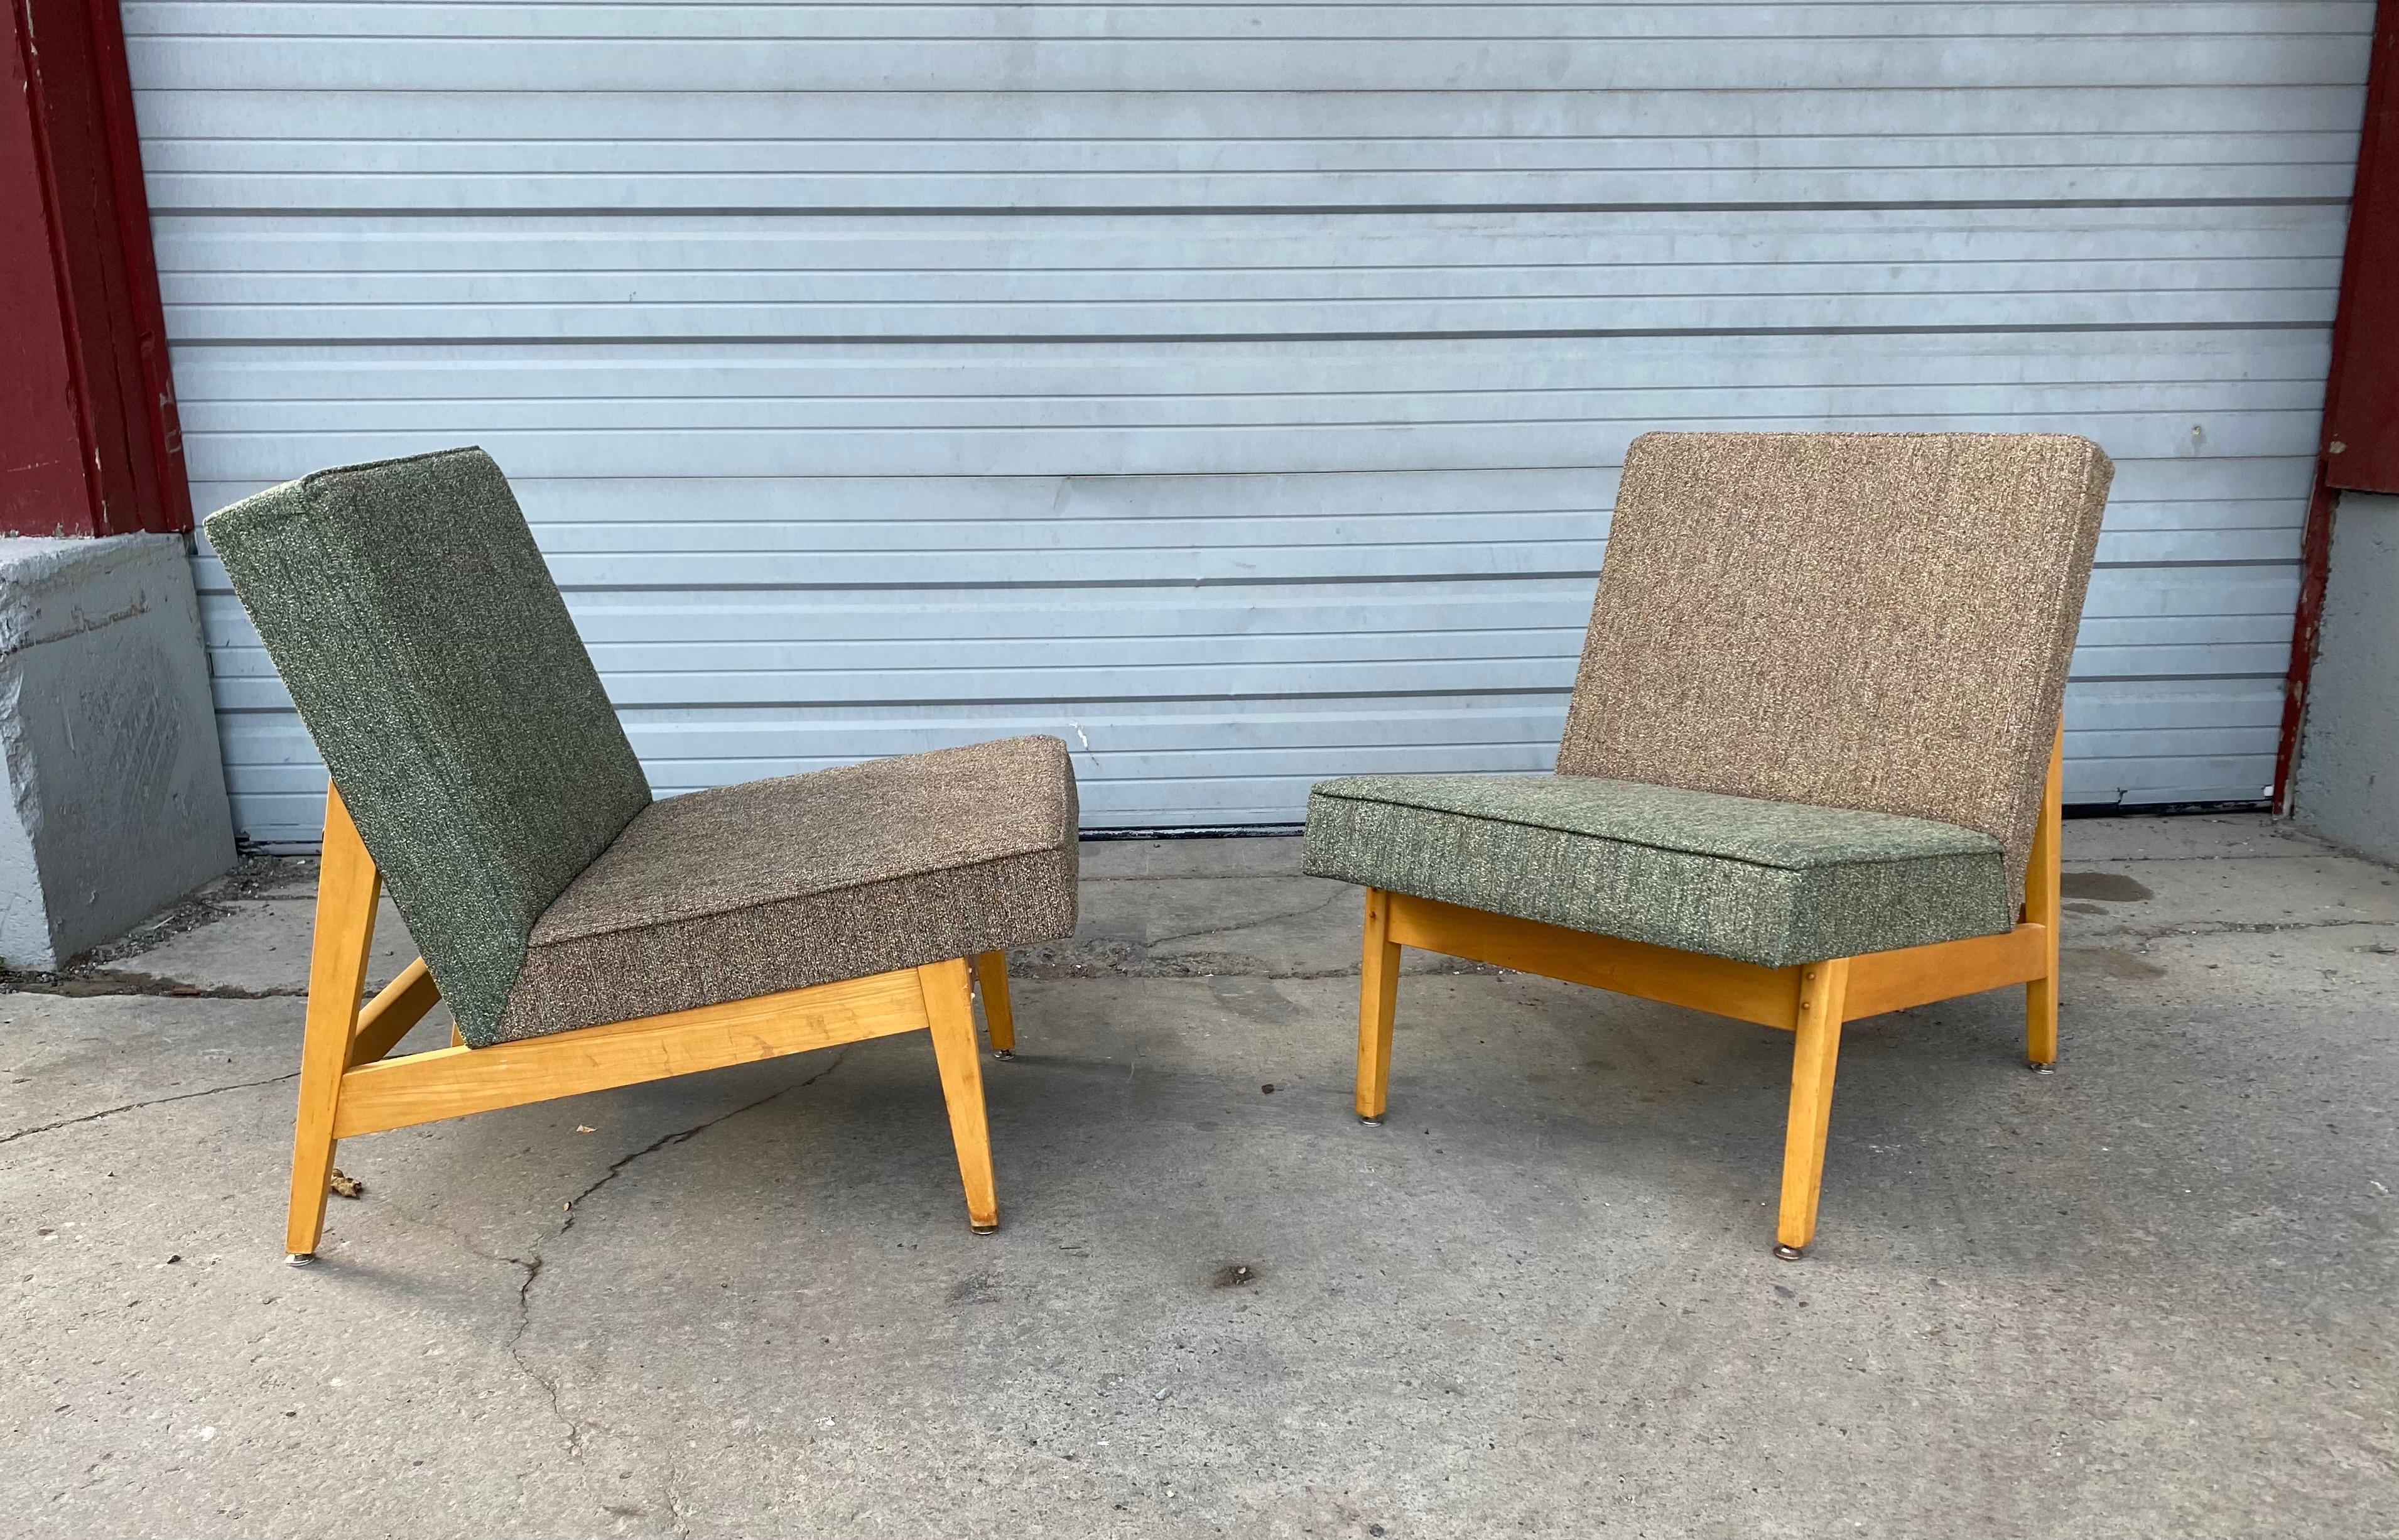 Stunning pair of modernist lounge chairs made by Gunlocke, manner of Jens Risom, amazing original condition, beautiful blond wood frames. Retain original two-tone wool fabric, extremely comfortable, superior quality and construction, hand delivery